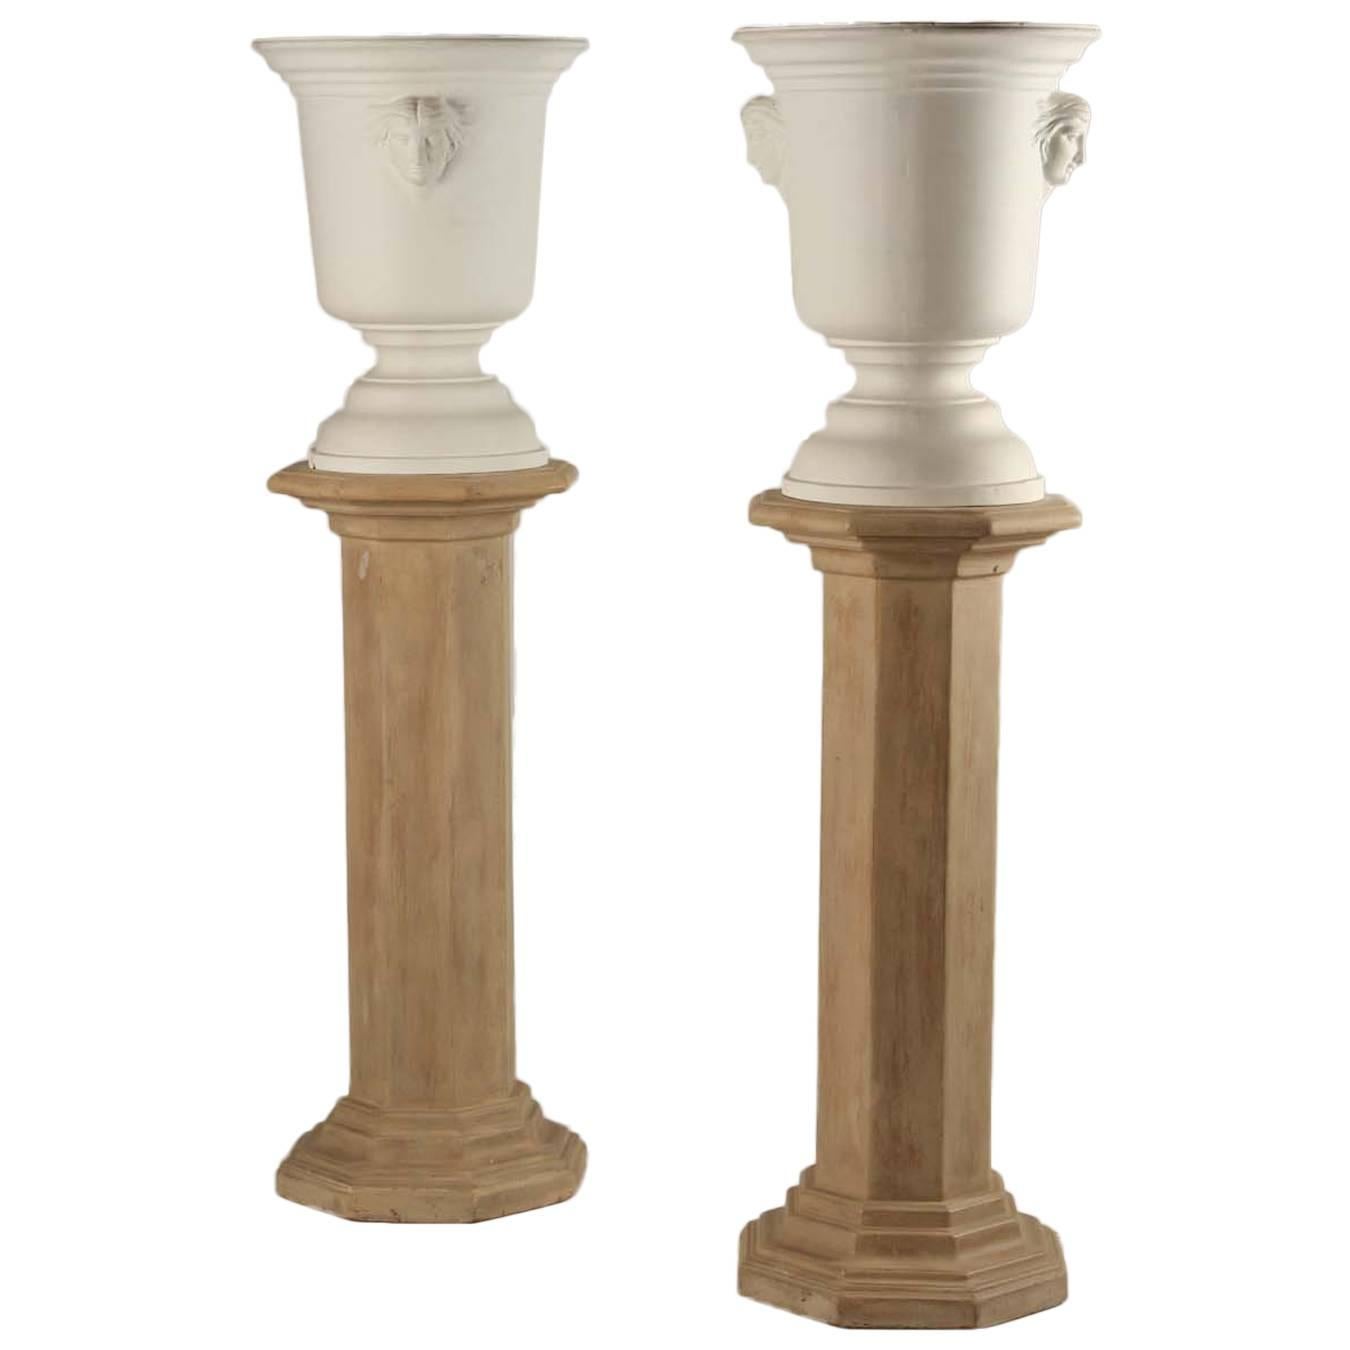 Pair of Urns on Columns Light Fixtures For Sale